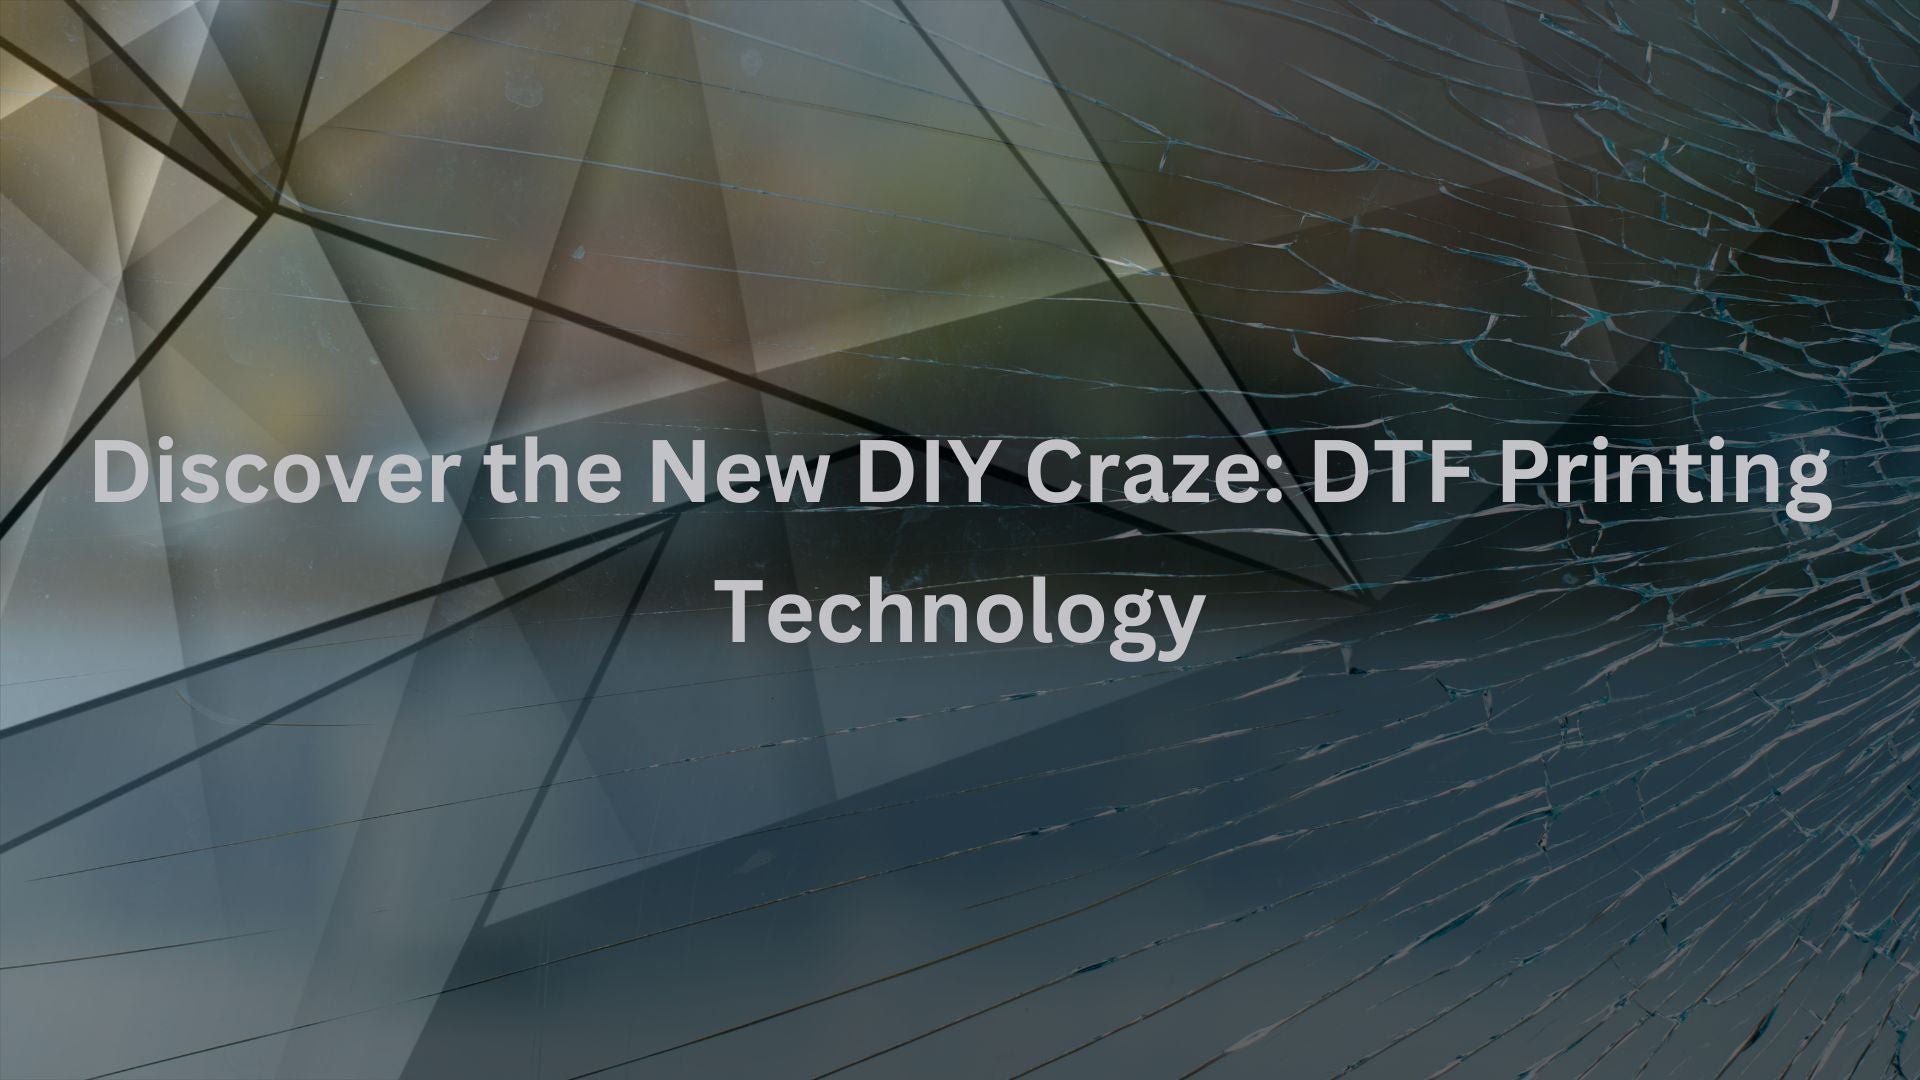 Discover the New DIY Craze: DTF Printing Technology